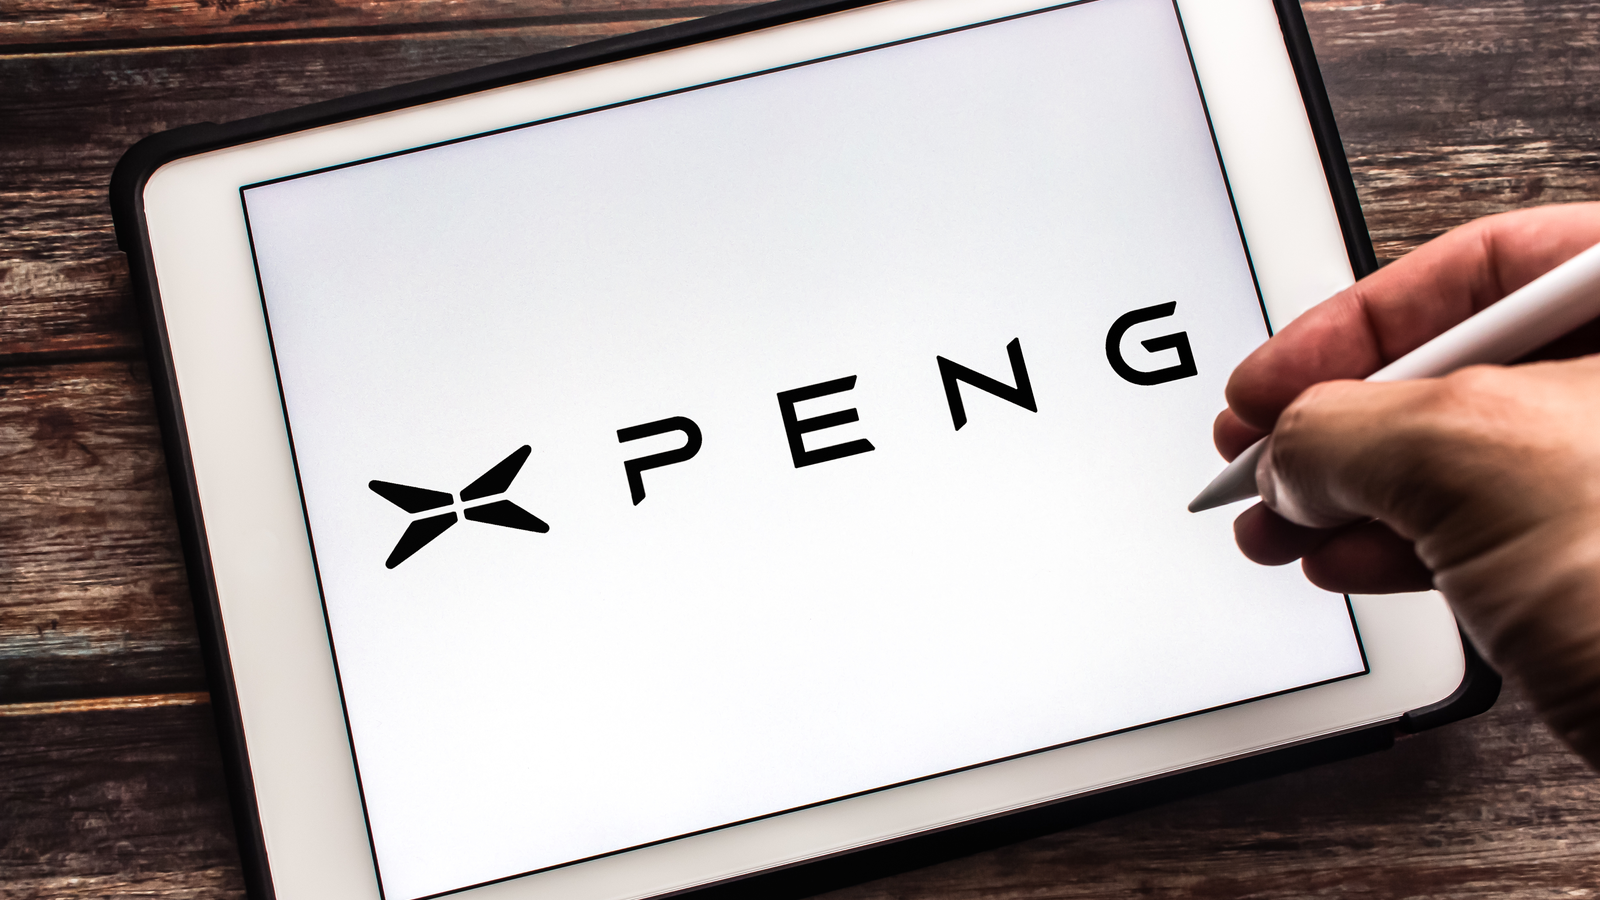 The Logo of Chinese electric vehicle manufacturer Xpeng (Guangzhou Xiaopeng Motors, also known as XMotors.ai) on tablet.